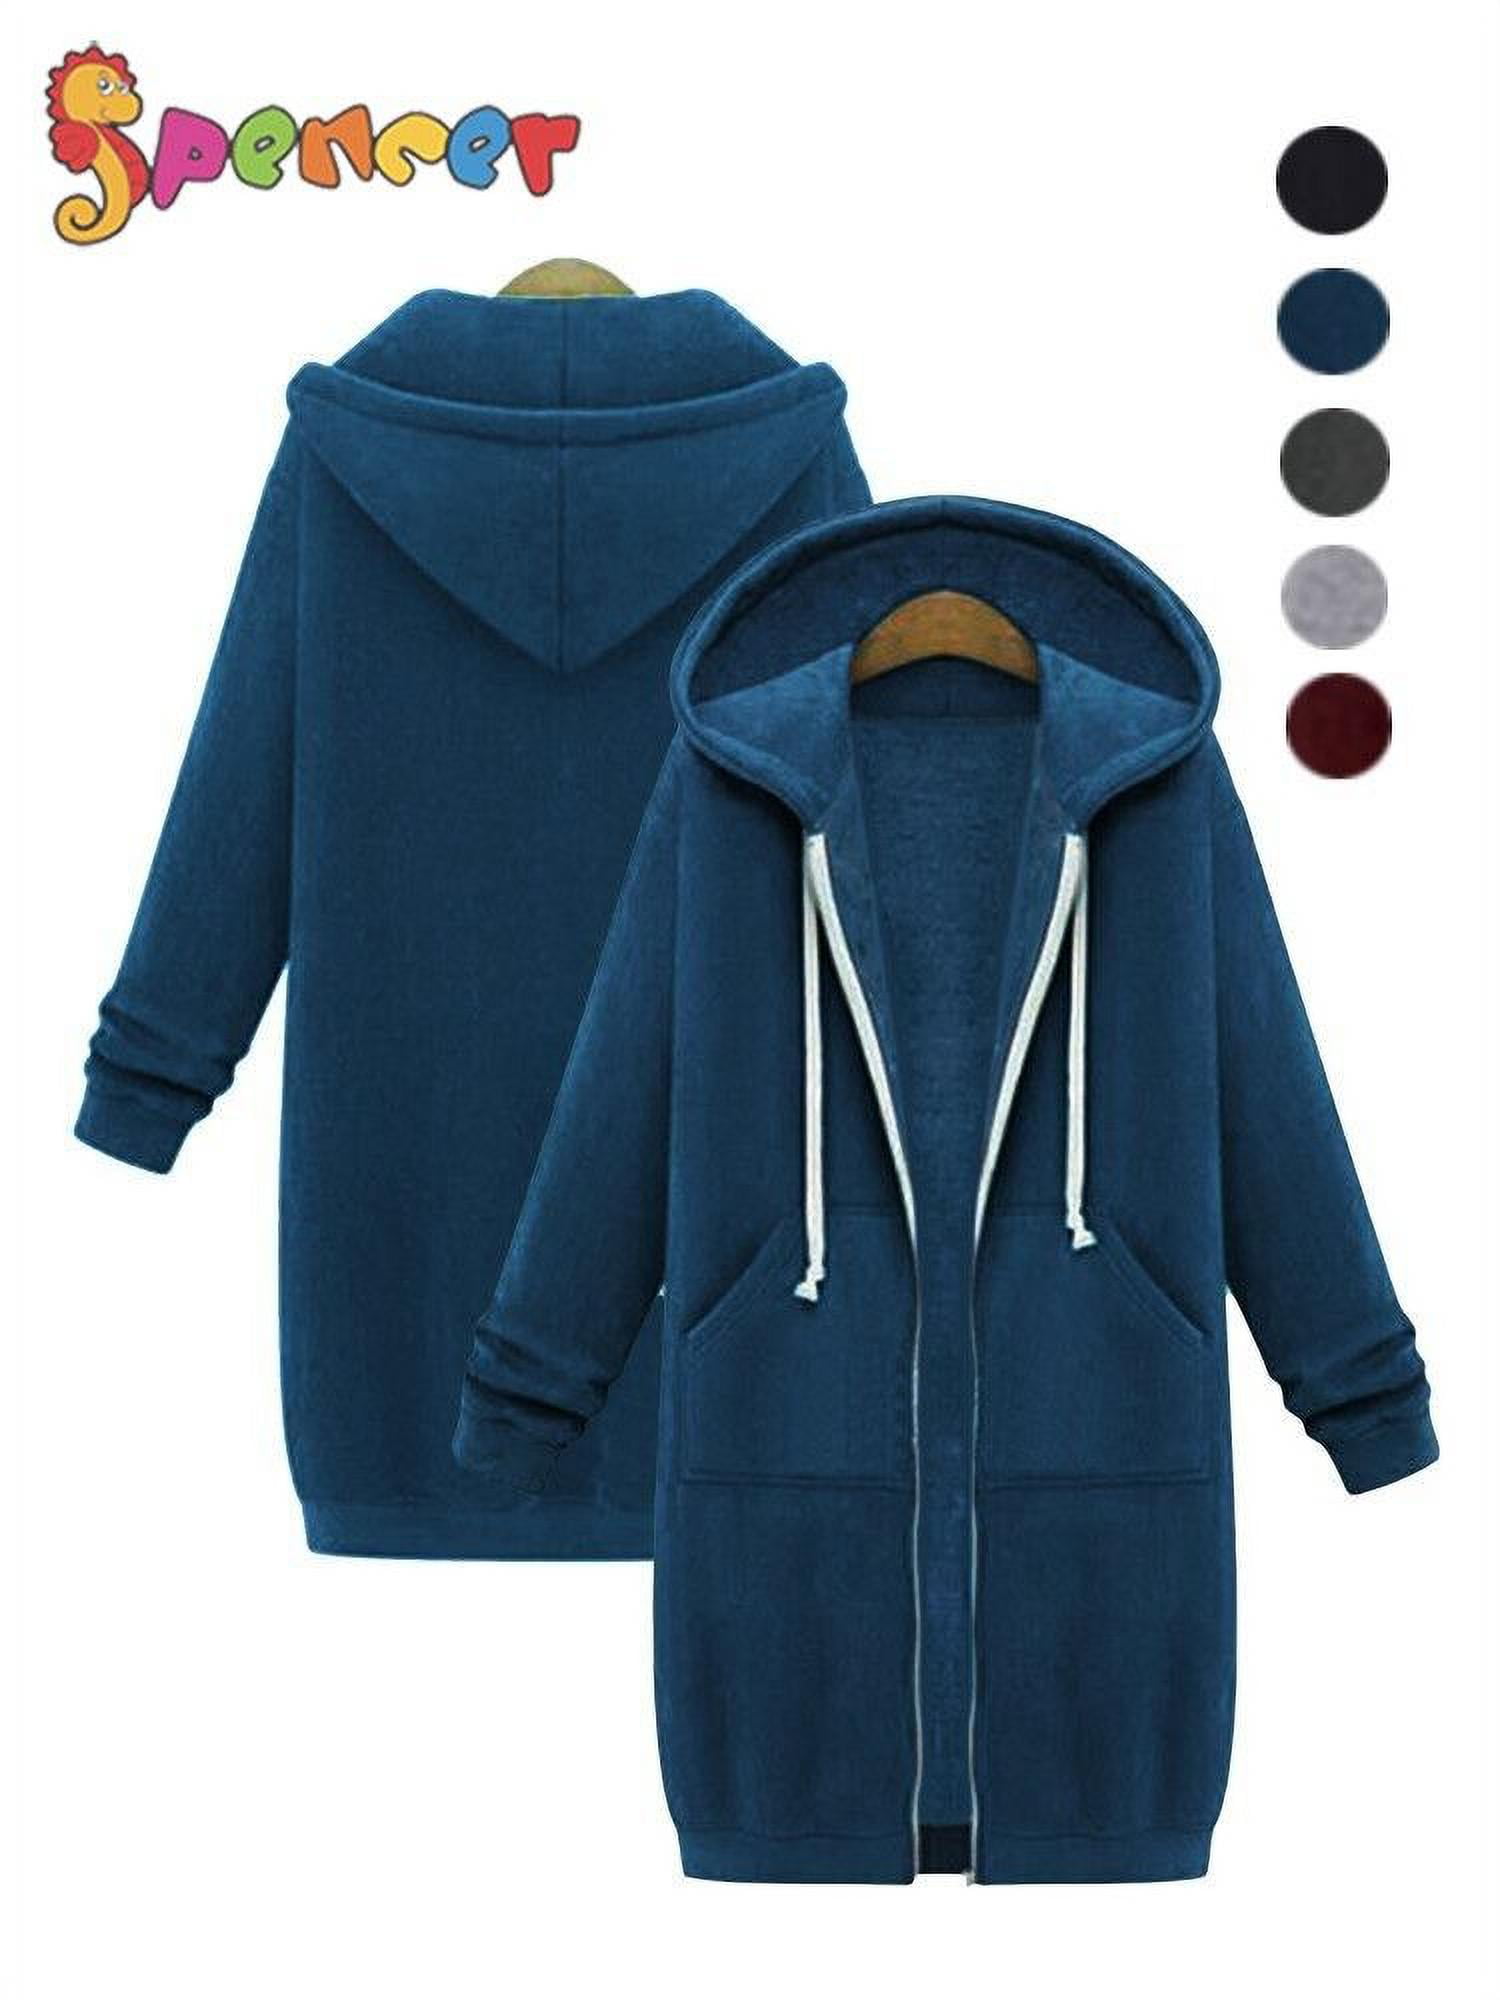 Womens Hooded Warm Coats Casual Winter Sherpa Lined Zip Up Hooded Sweatshirt Jacket Parkas Overcoat with Pockets 